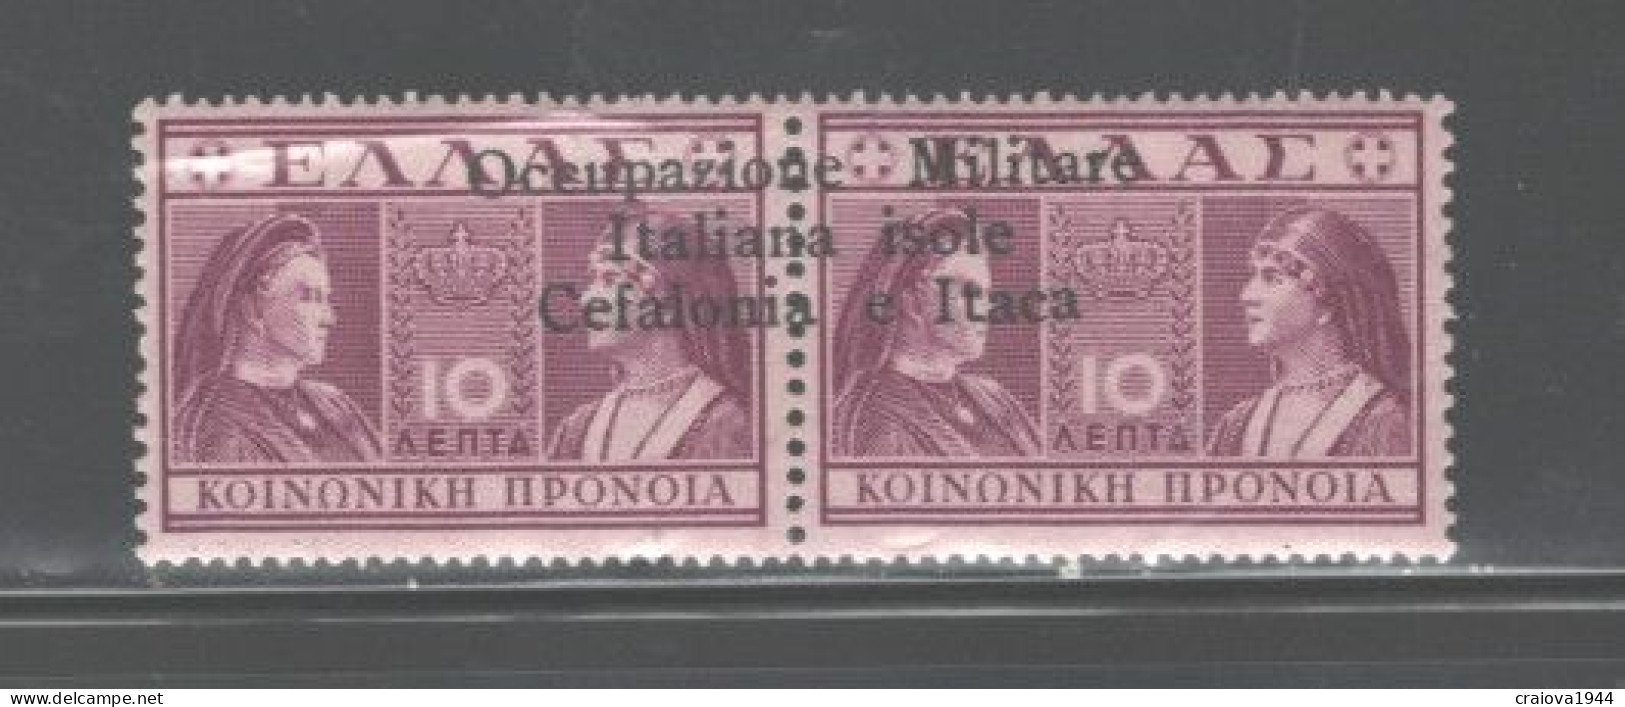 GREECE,1941"ISSUE FOR CEPHALONIA & ITHACA"#NR2a,Horz.OVPT. MNH, CERT. - Islas Ionian